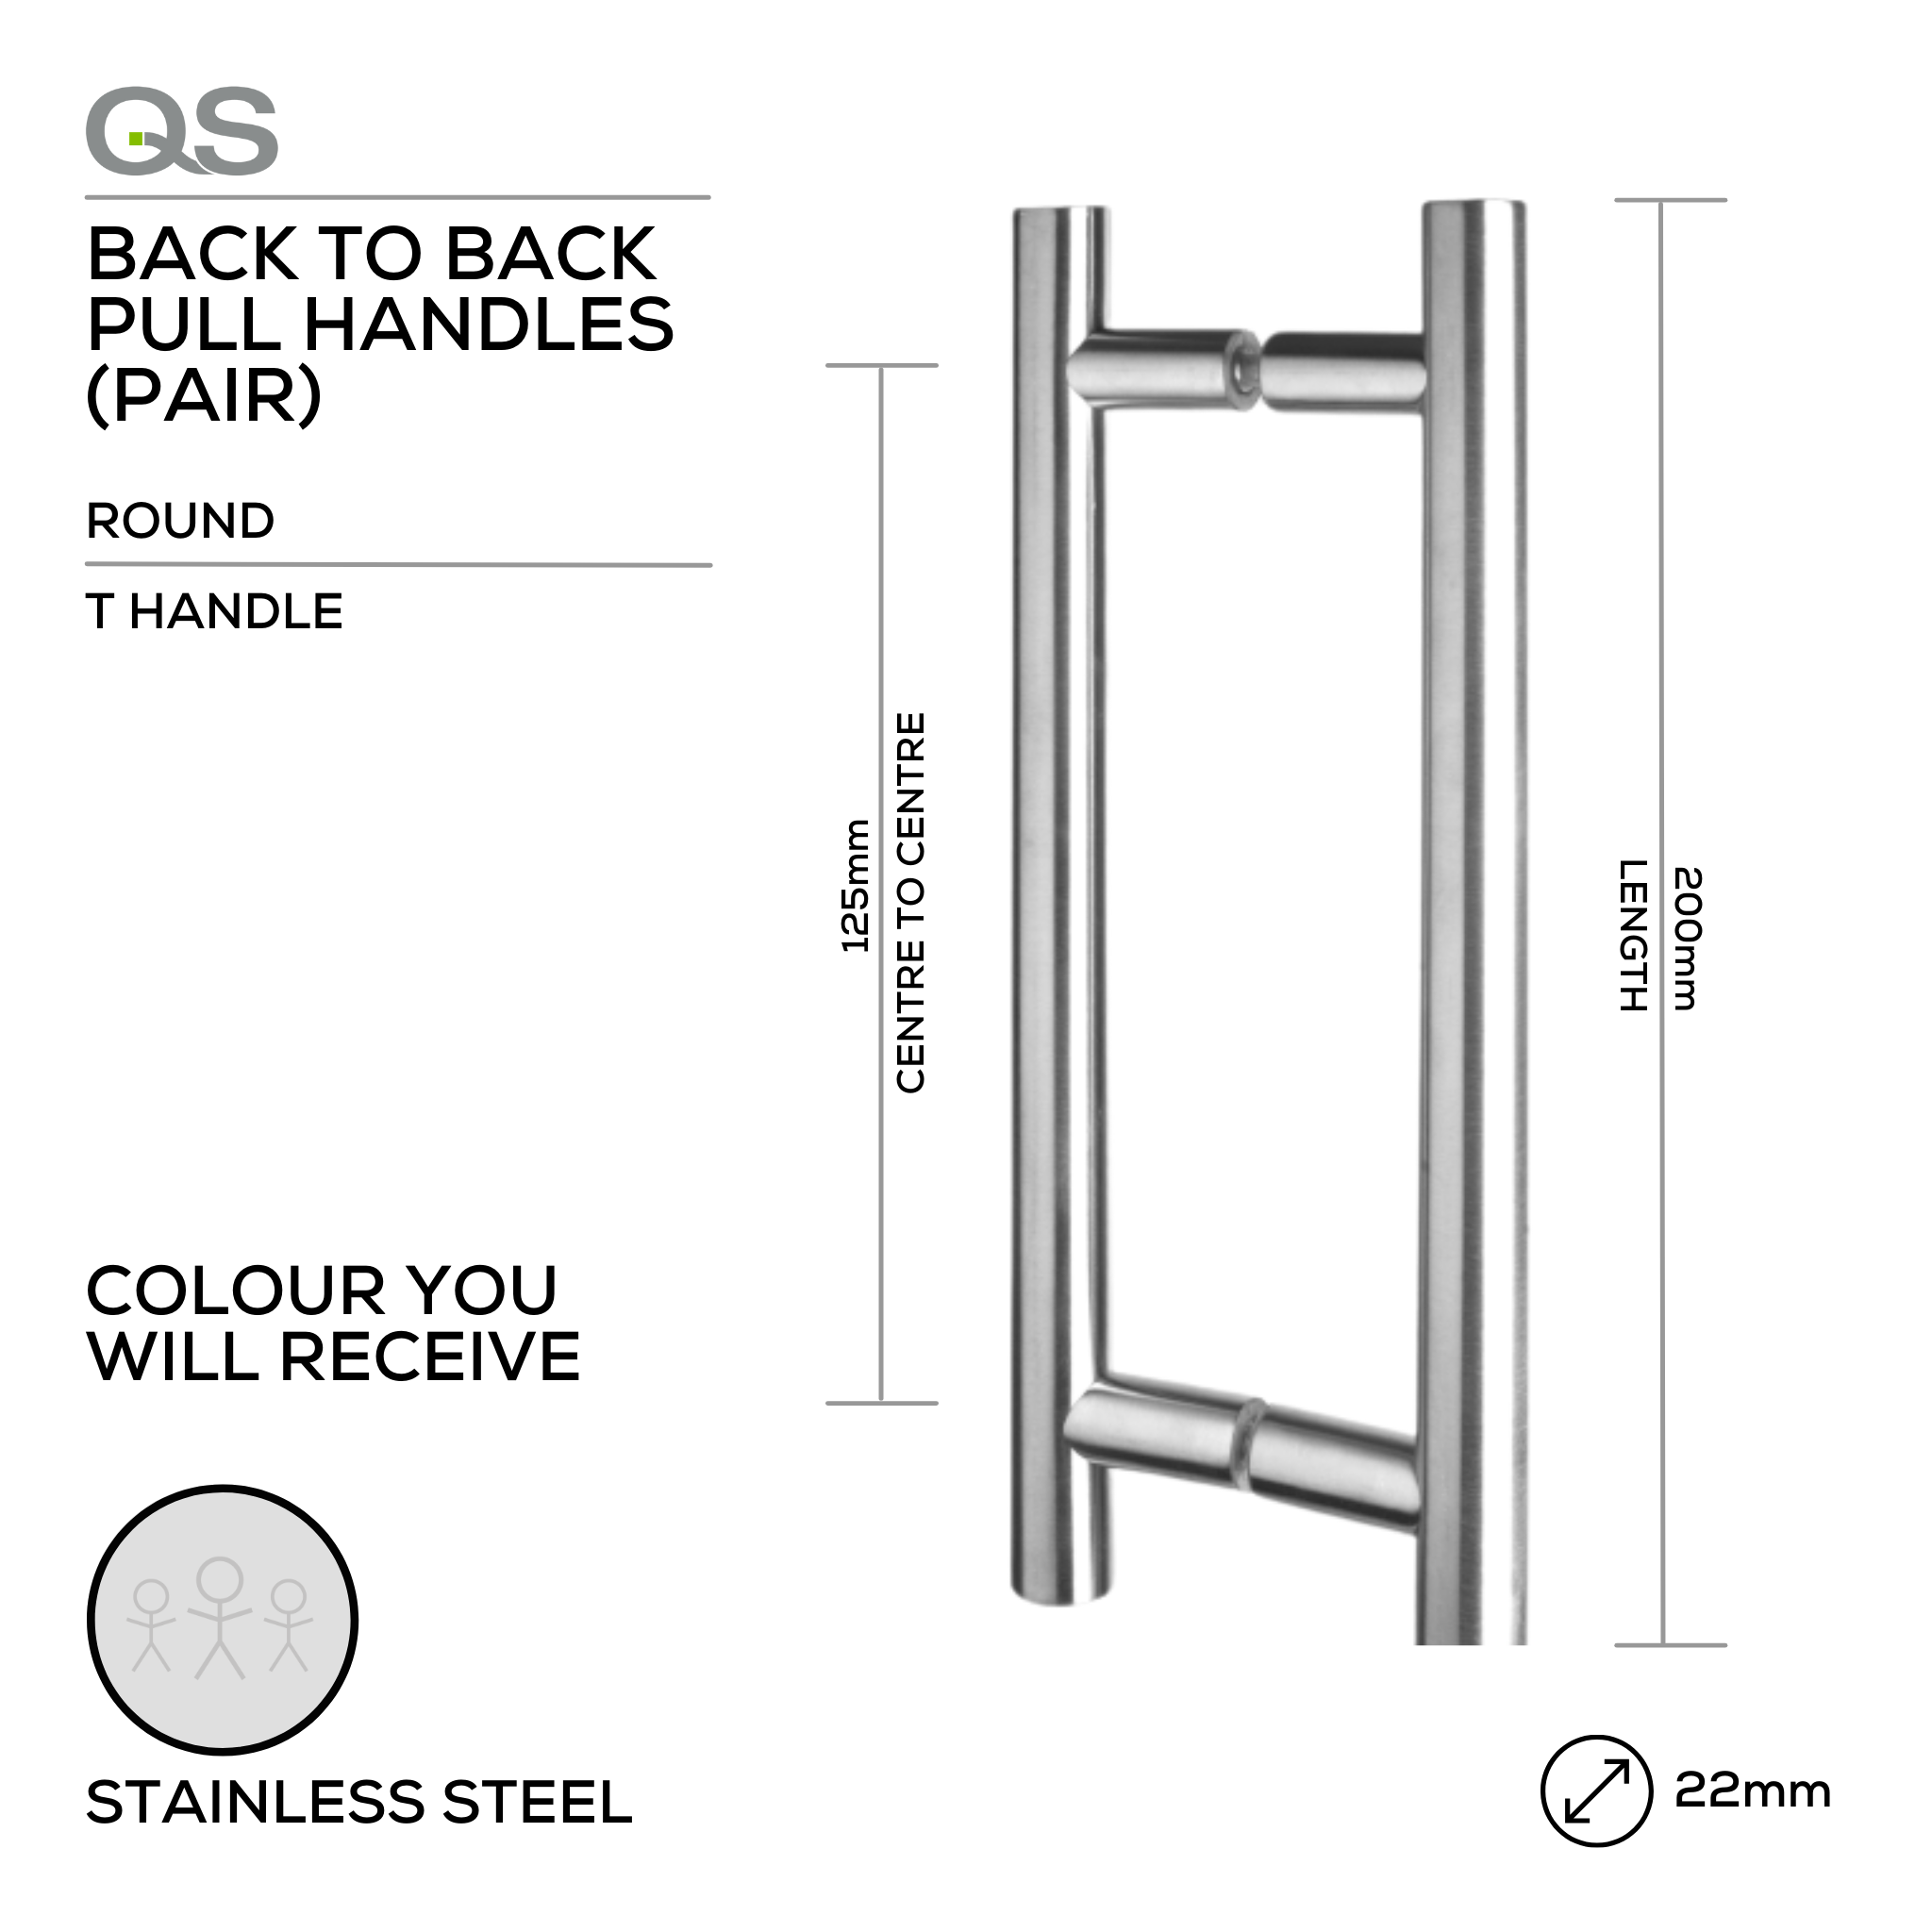 QS2503 T Handle, Pull Handle, Round, T Handle, BTB, 22mm (Ø) x 200mm (l) x 125mm (ctc), Stainless Steel, QS